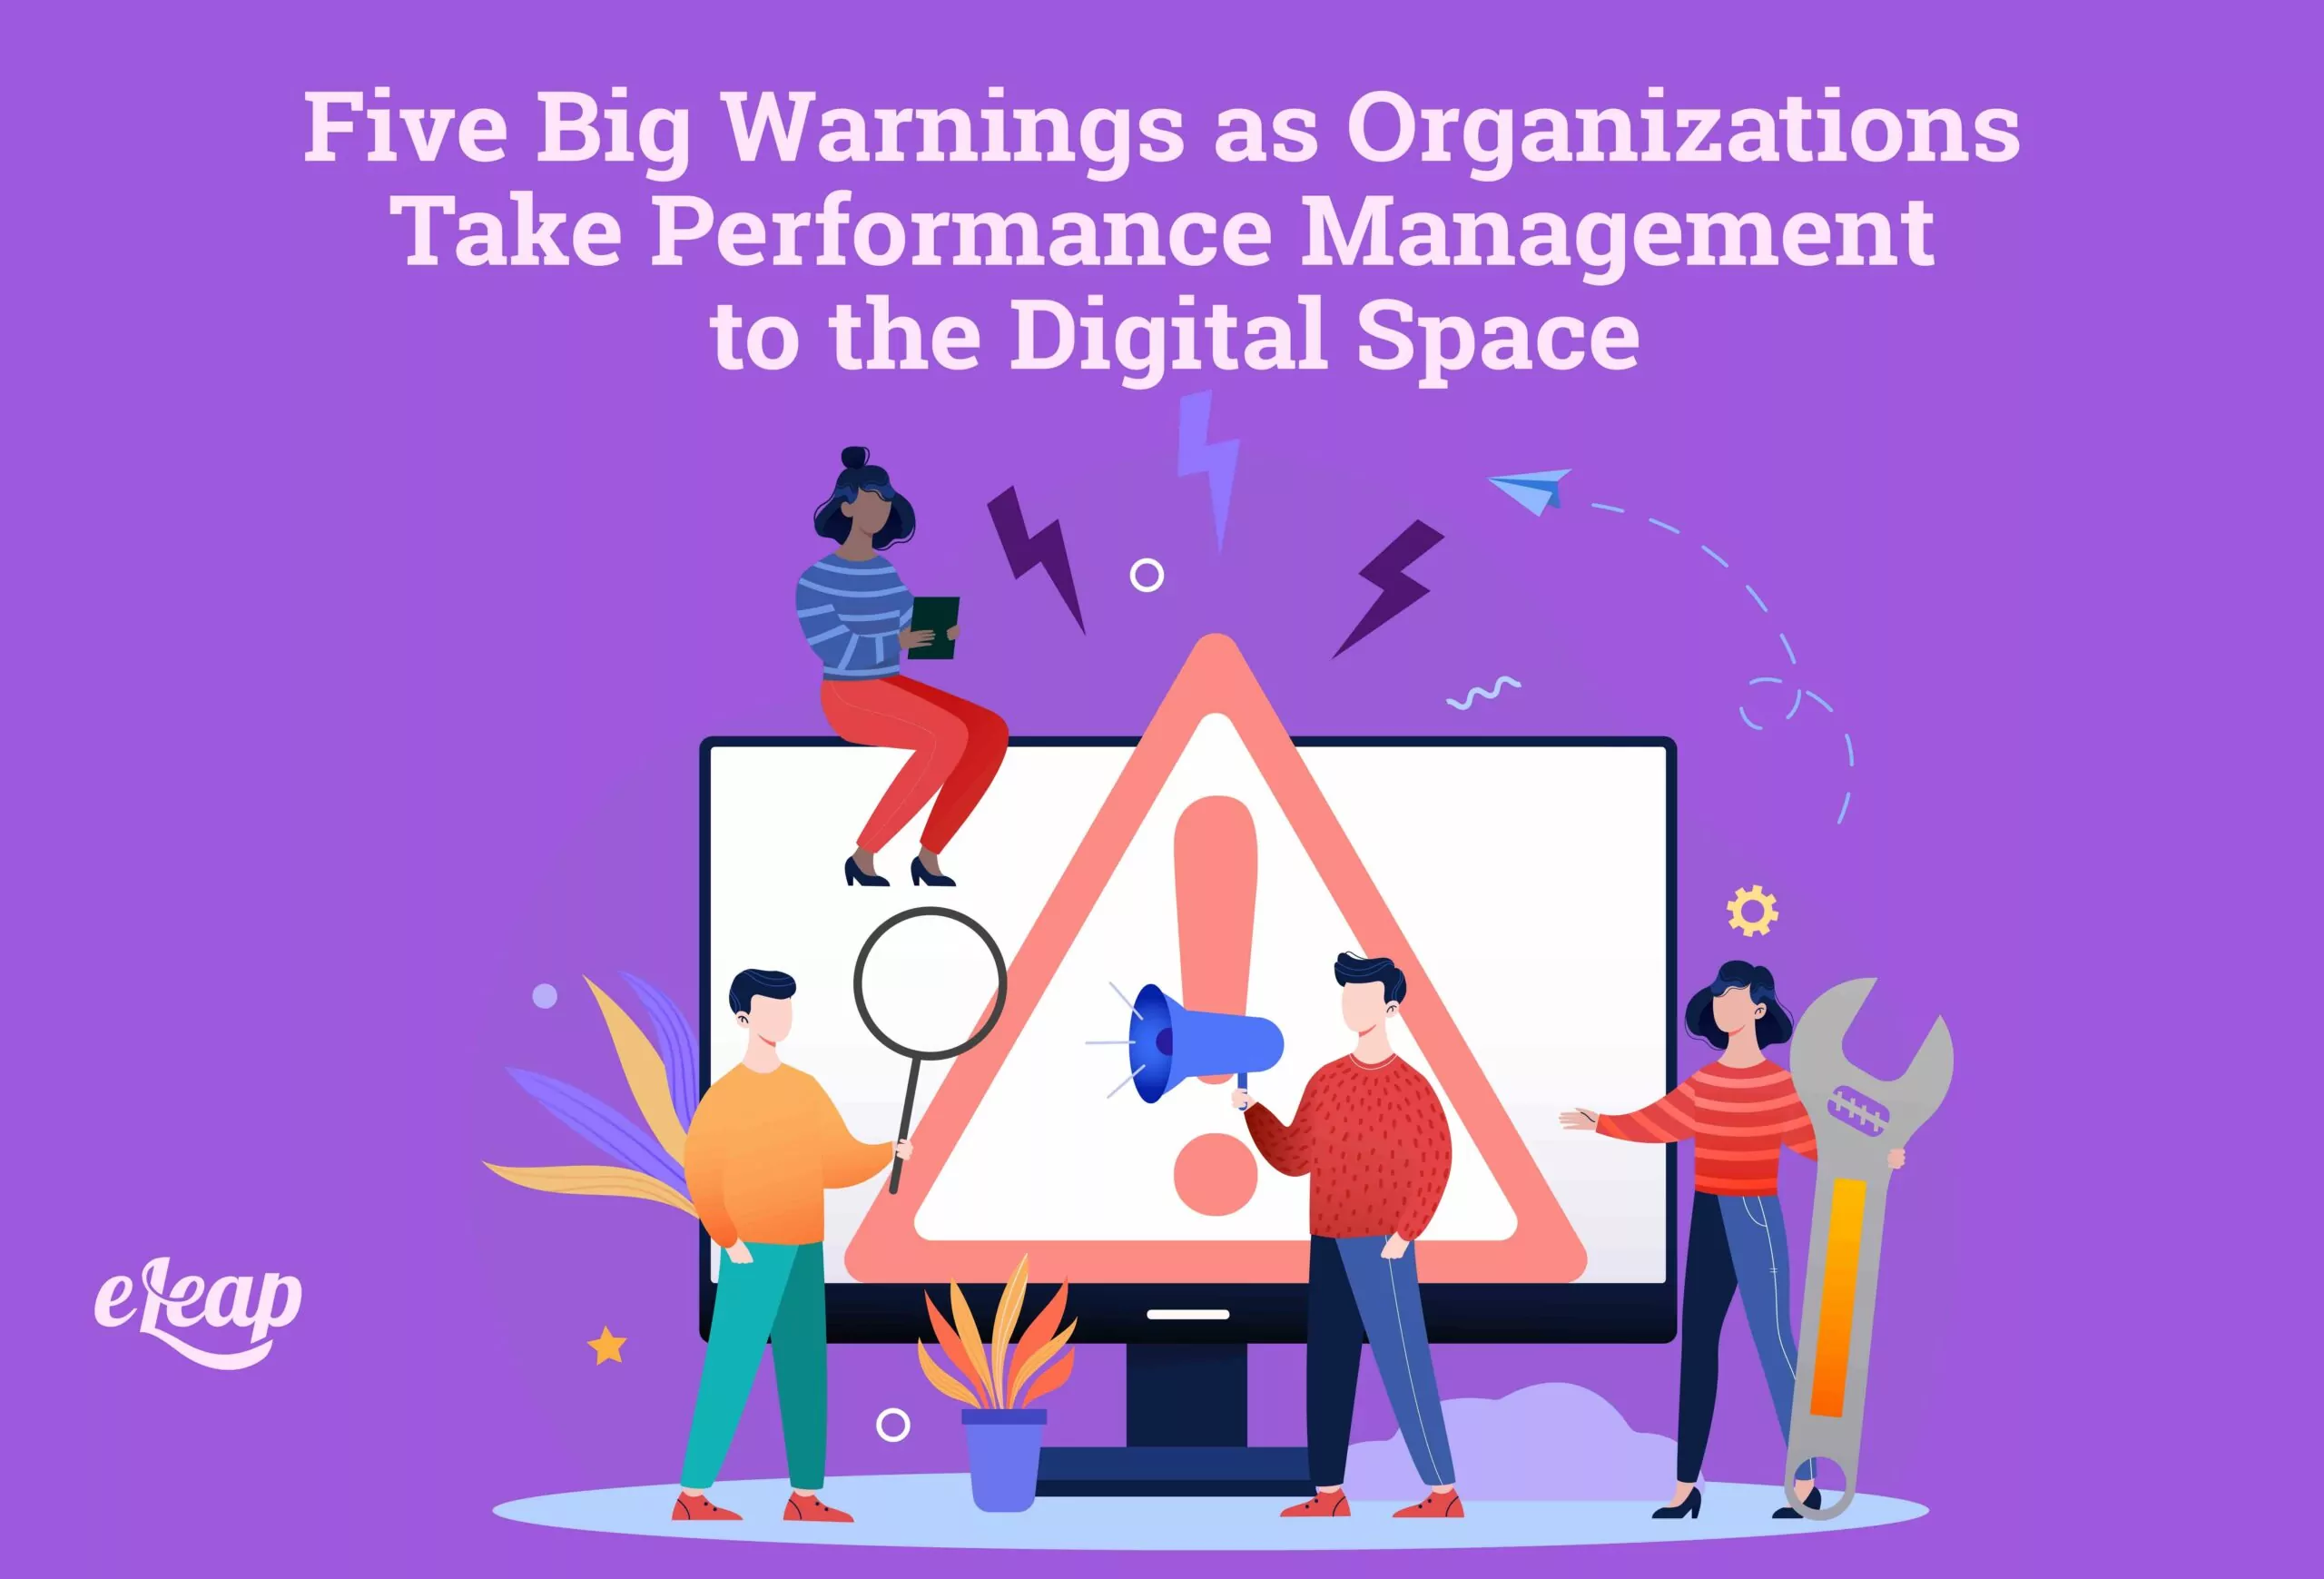 Five Big Warnings as Organizations Take Performance Management to the Digital Space